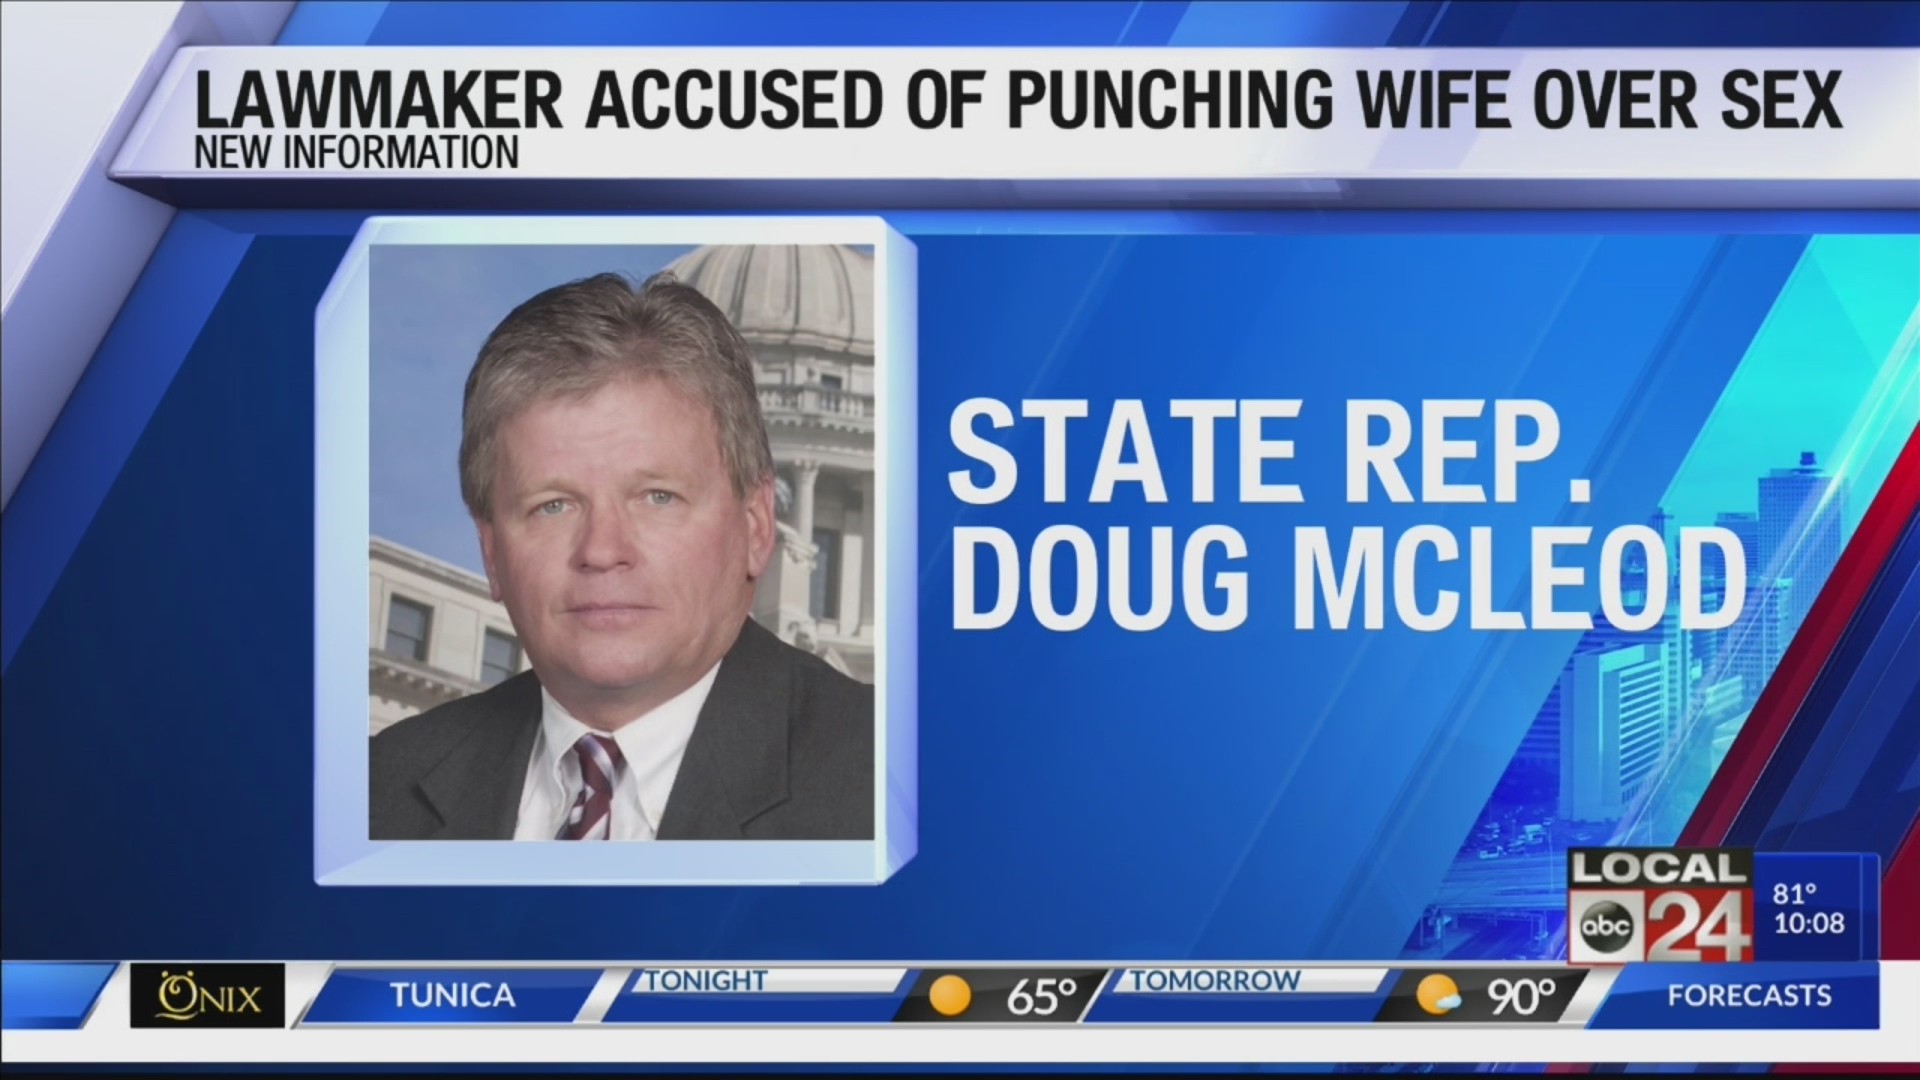 MS Lawmaker accused of punching wife says incident misrepresented